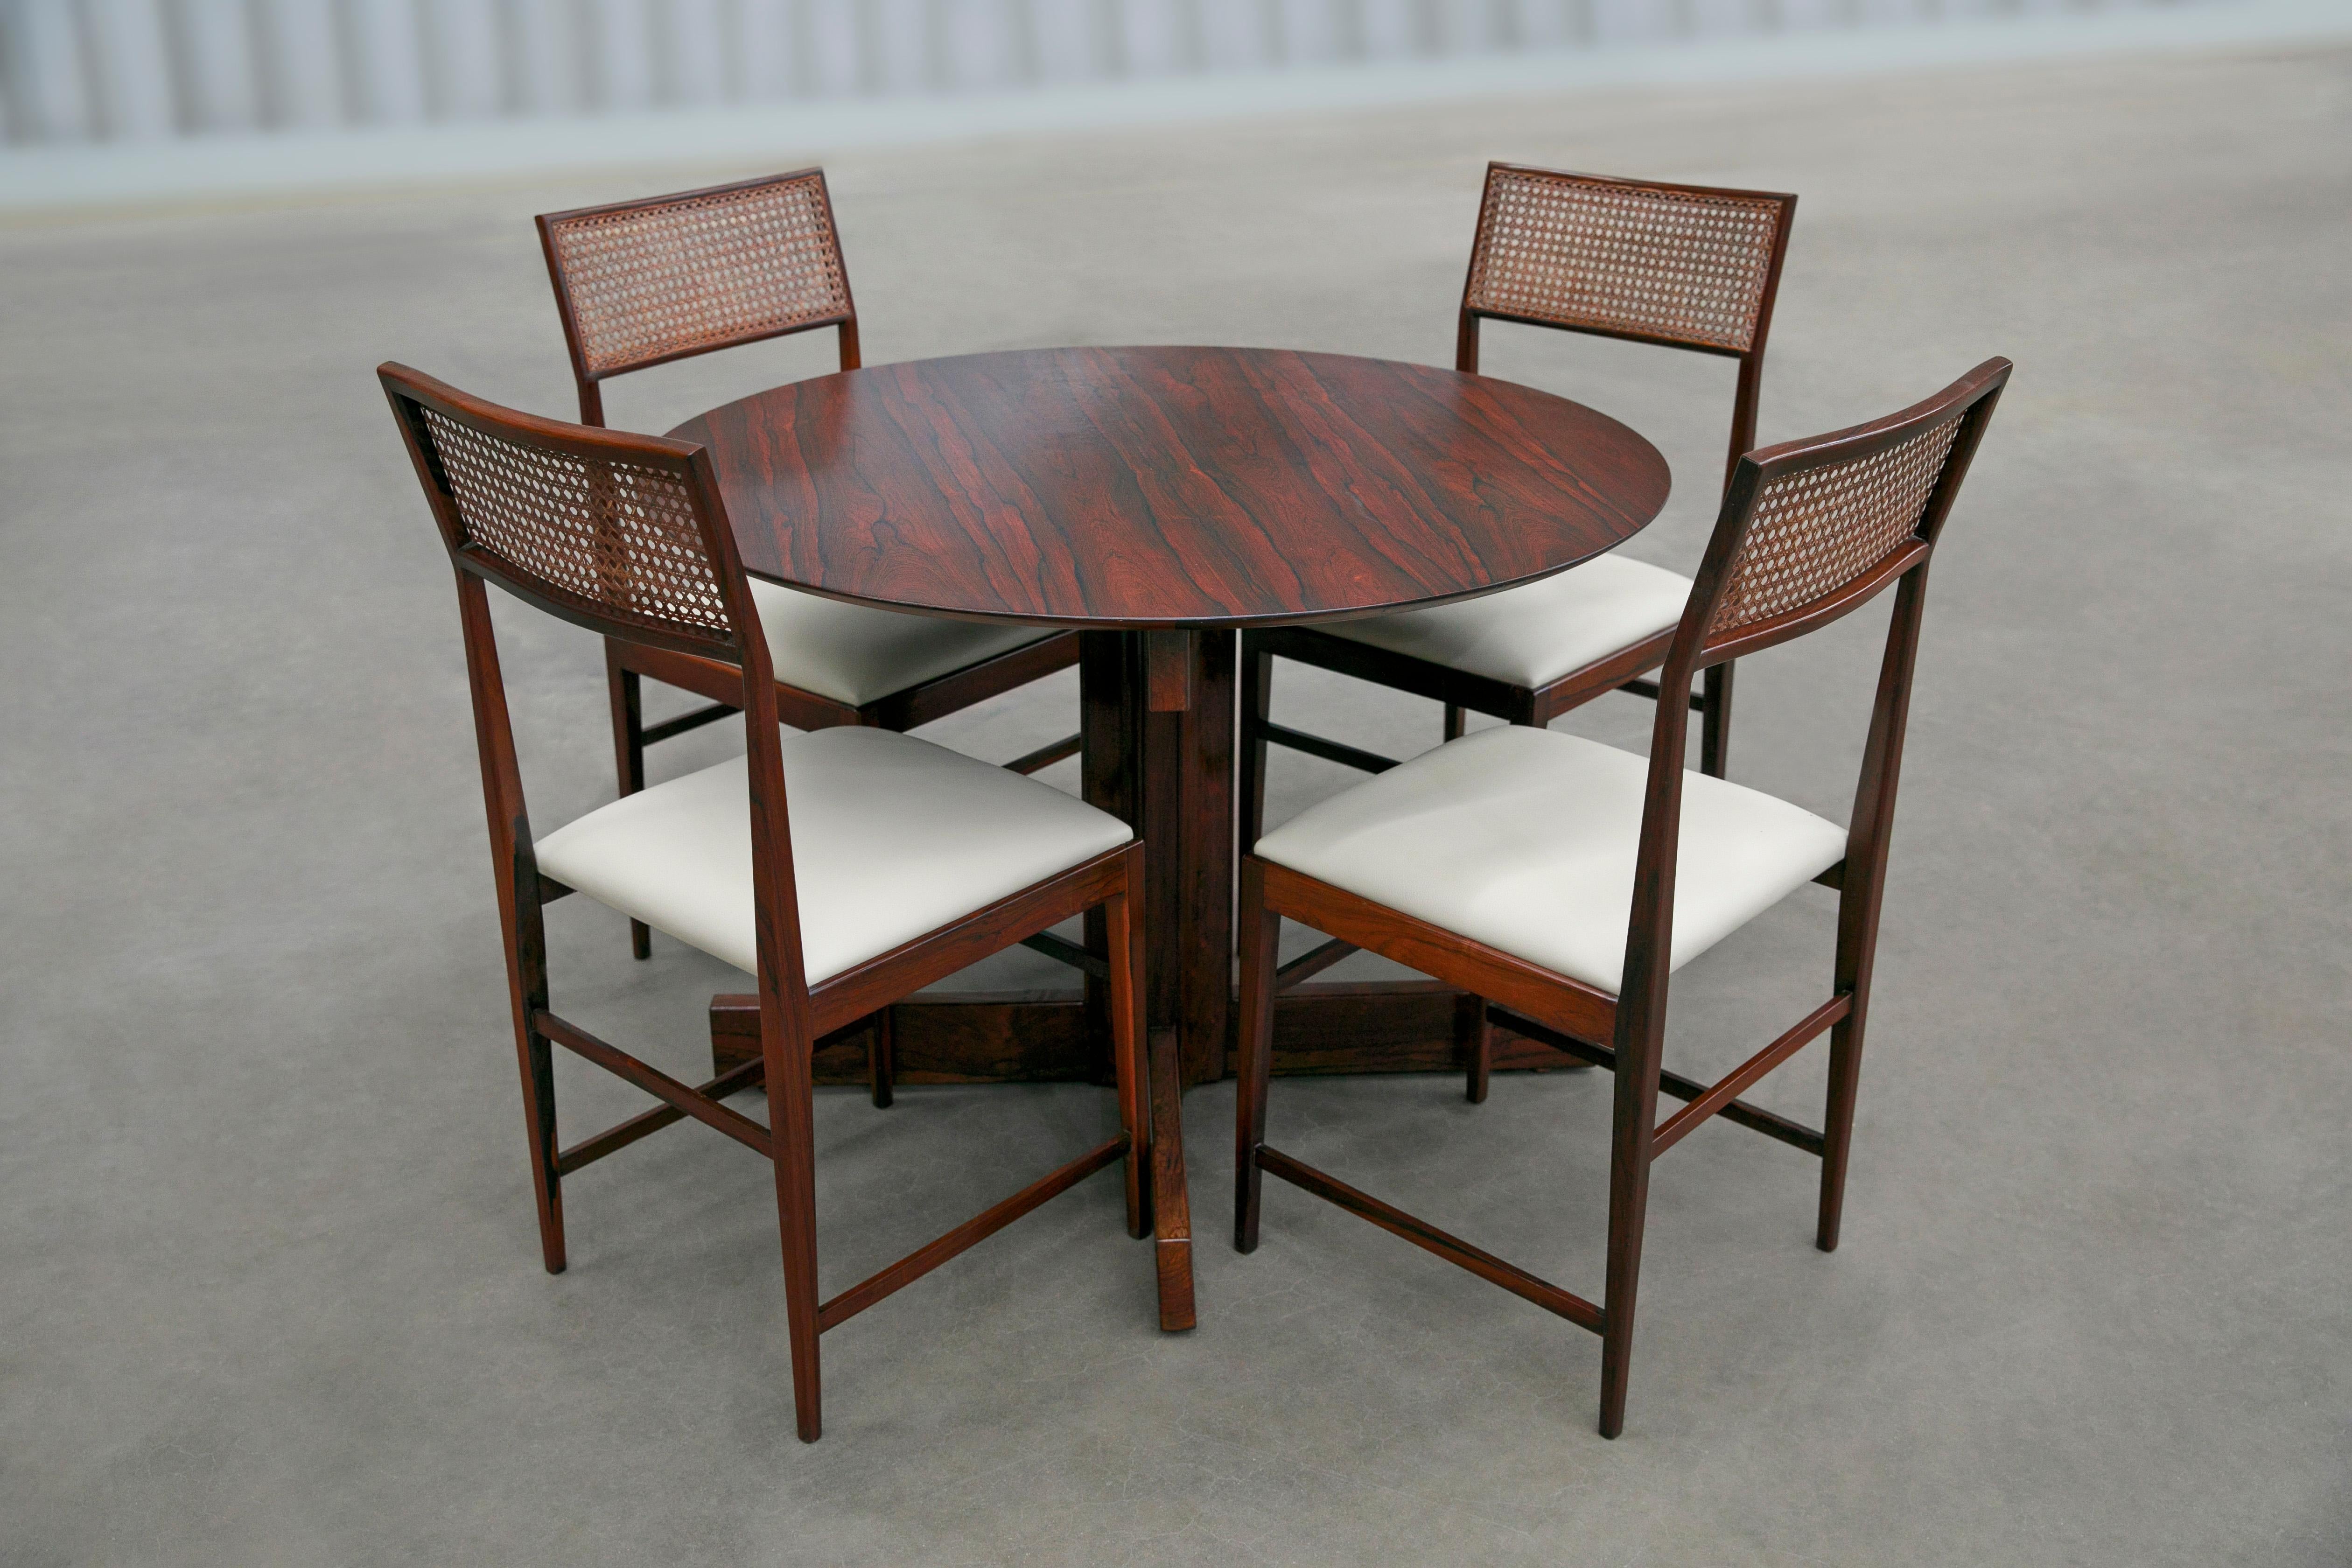 Mid-Century Modern Dining Table in Hardwood by Sergio Rodrigues, 1960, Brazil For Sale 1